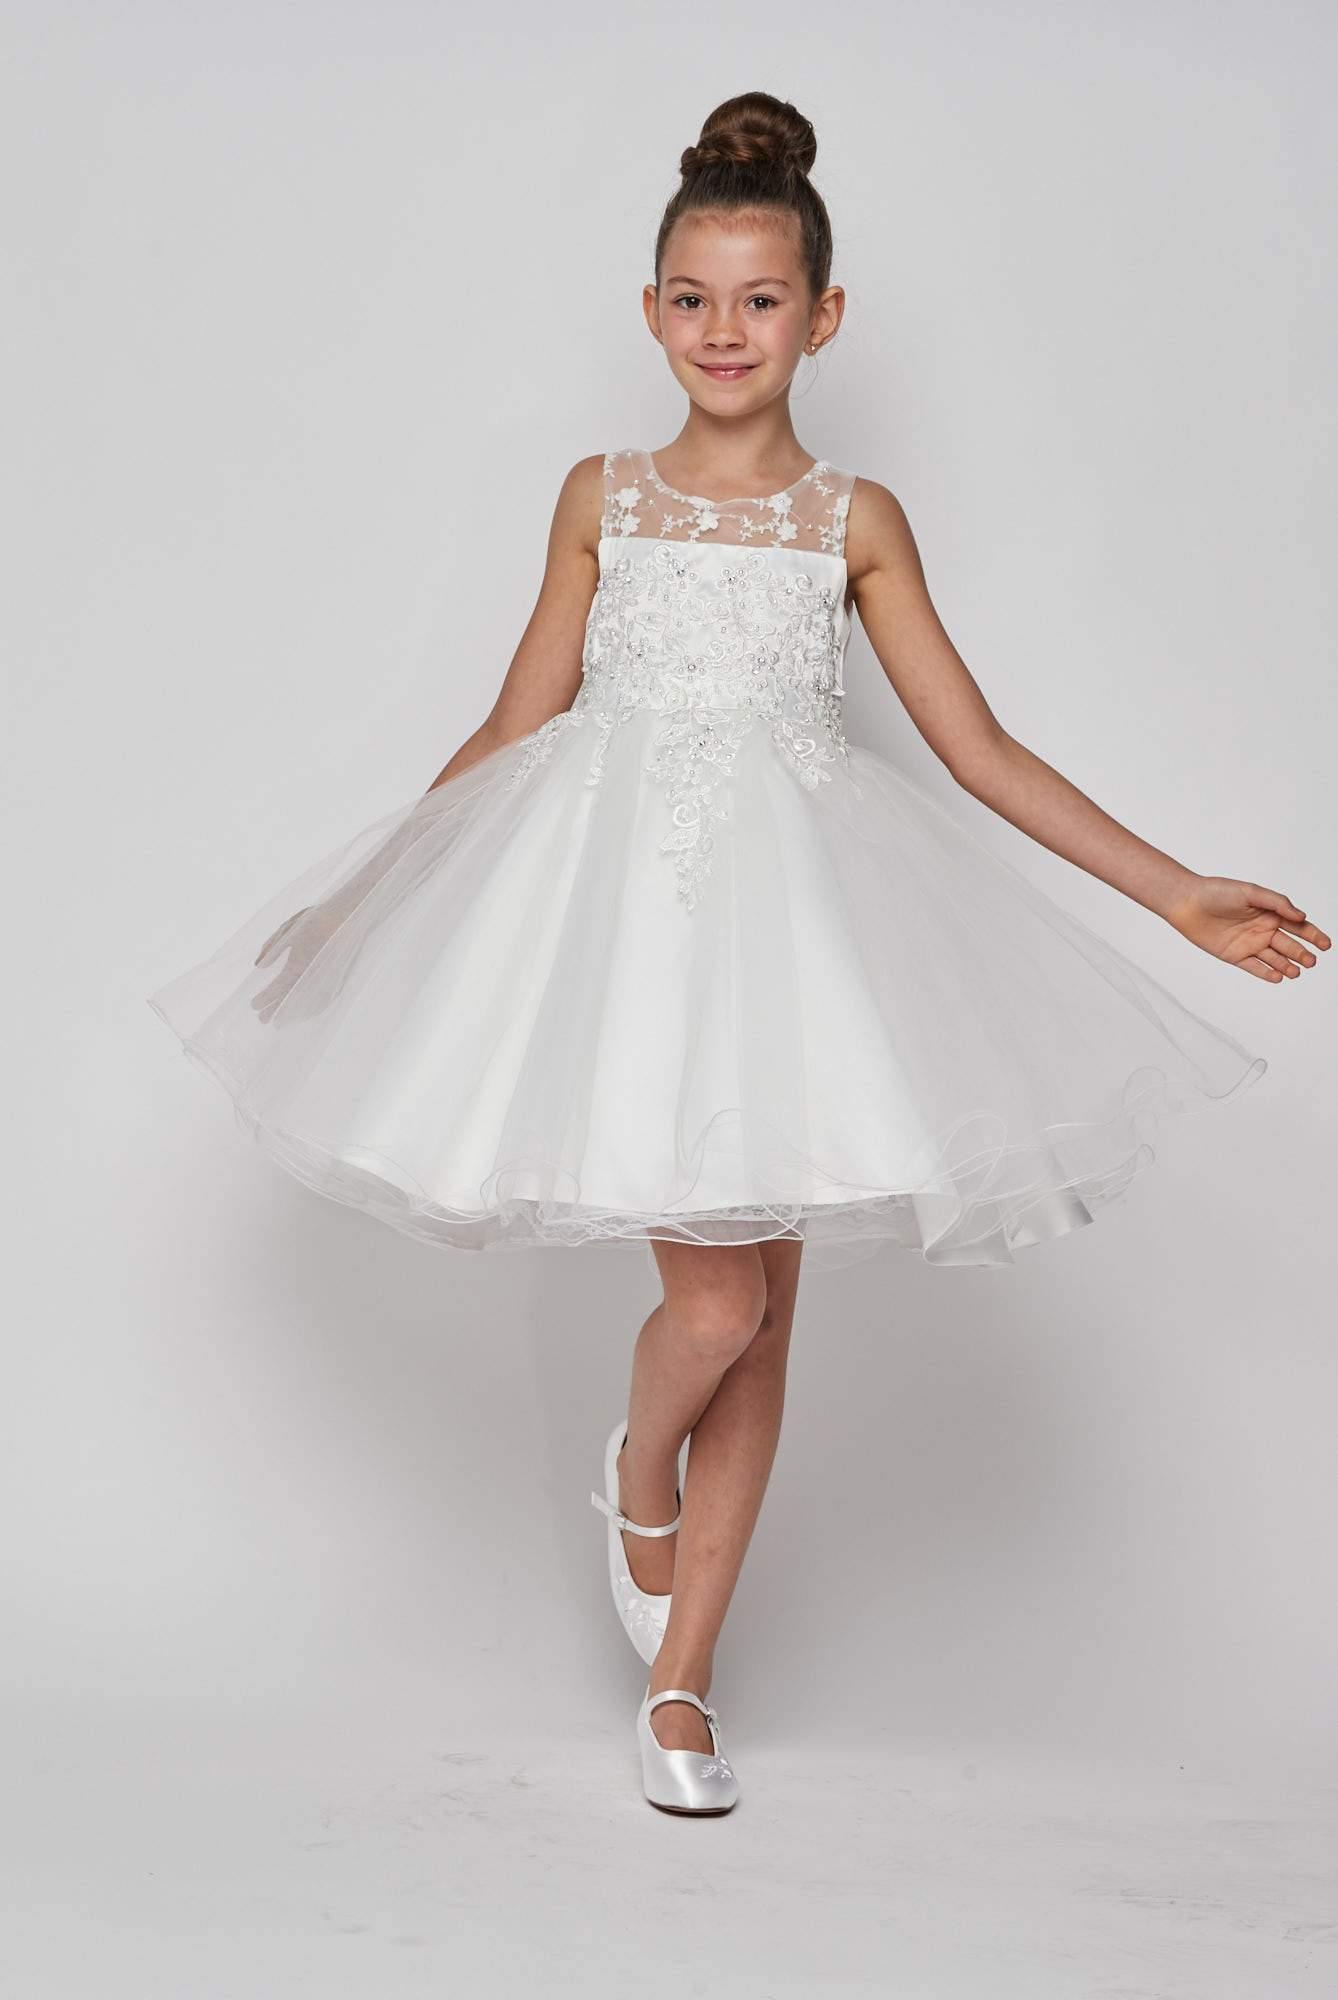 Sleeveless Embellished Short Party Dress Flower Girls - The Dress Outlet Cinderella Couture